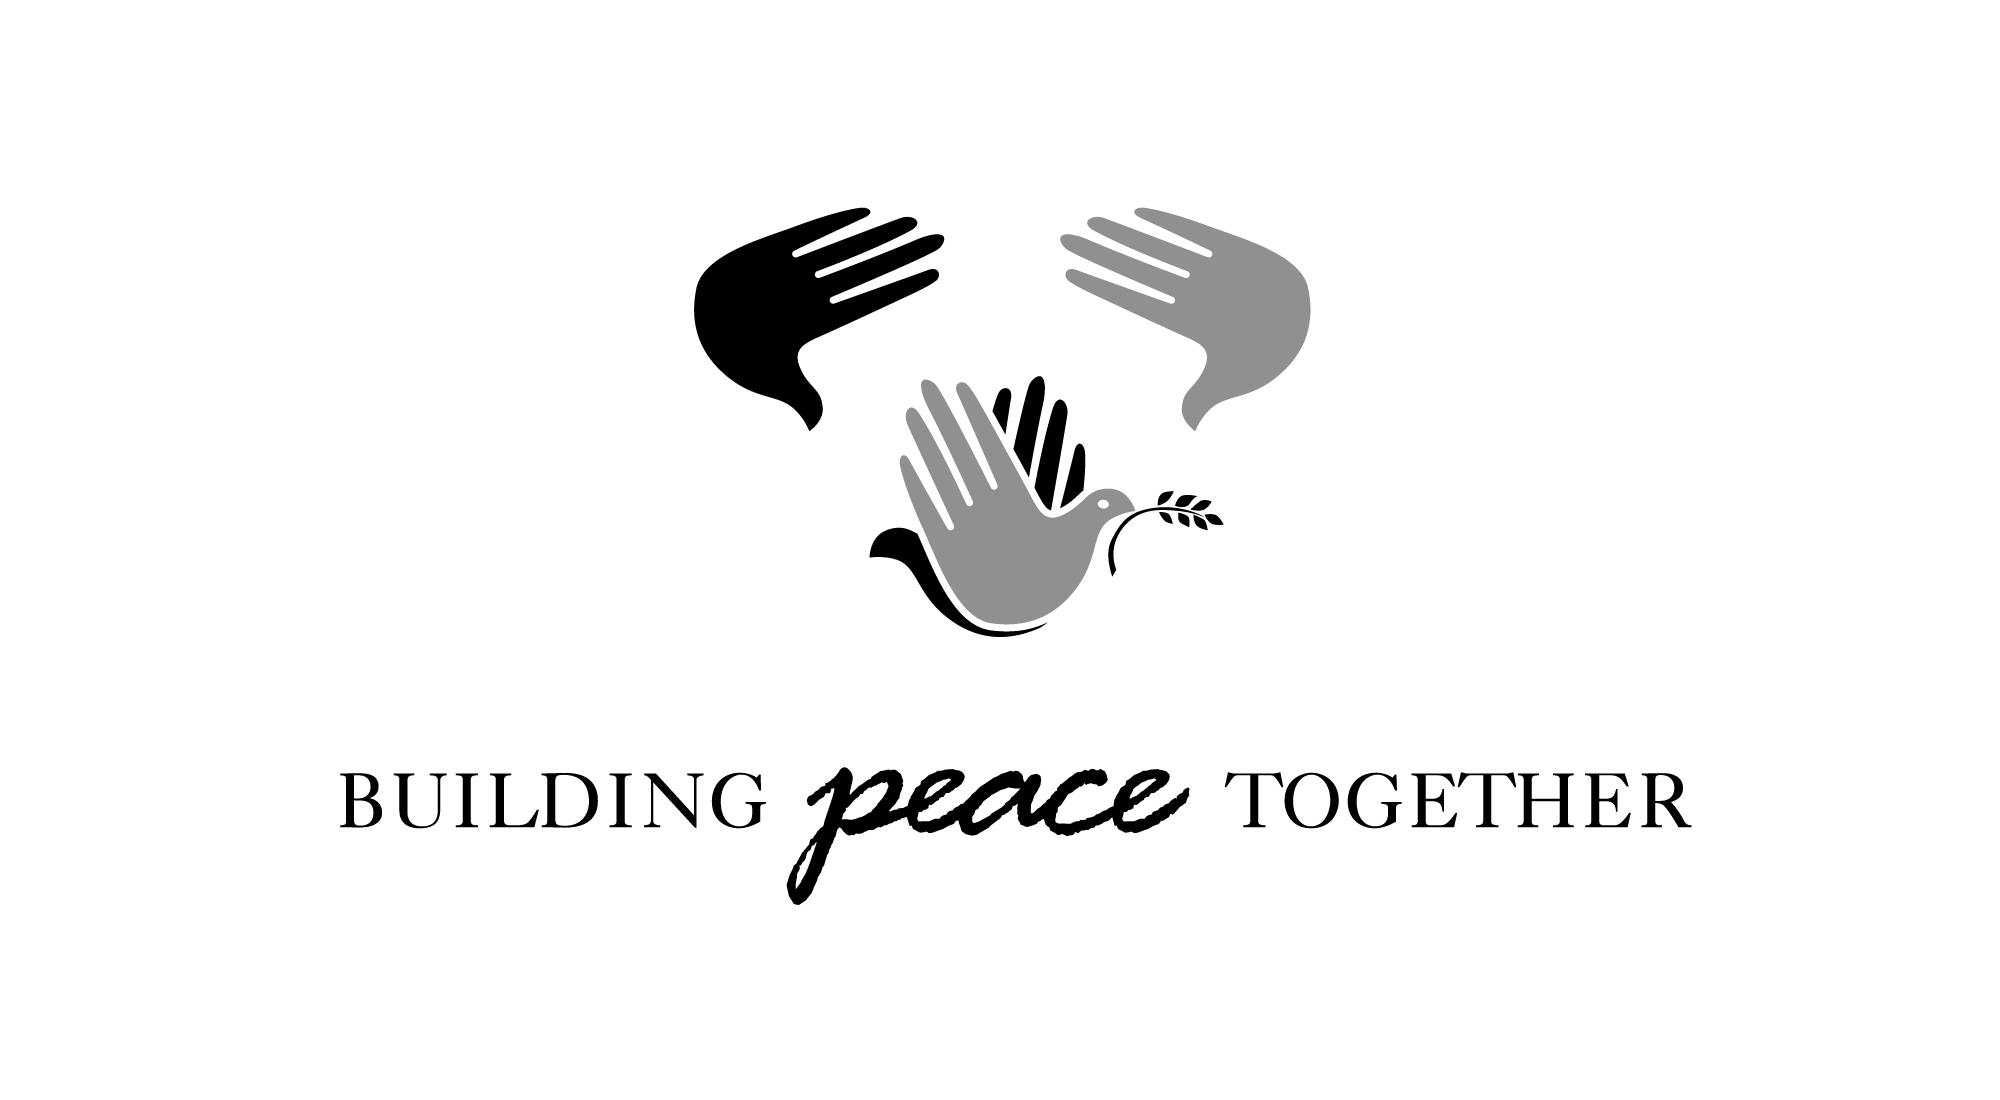 Image of Building Peace Together logo used hands to form a dove